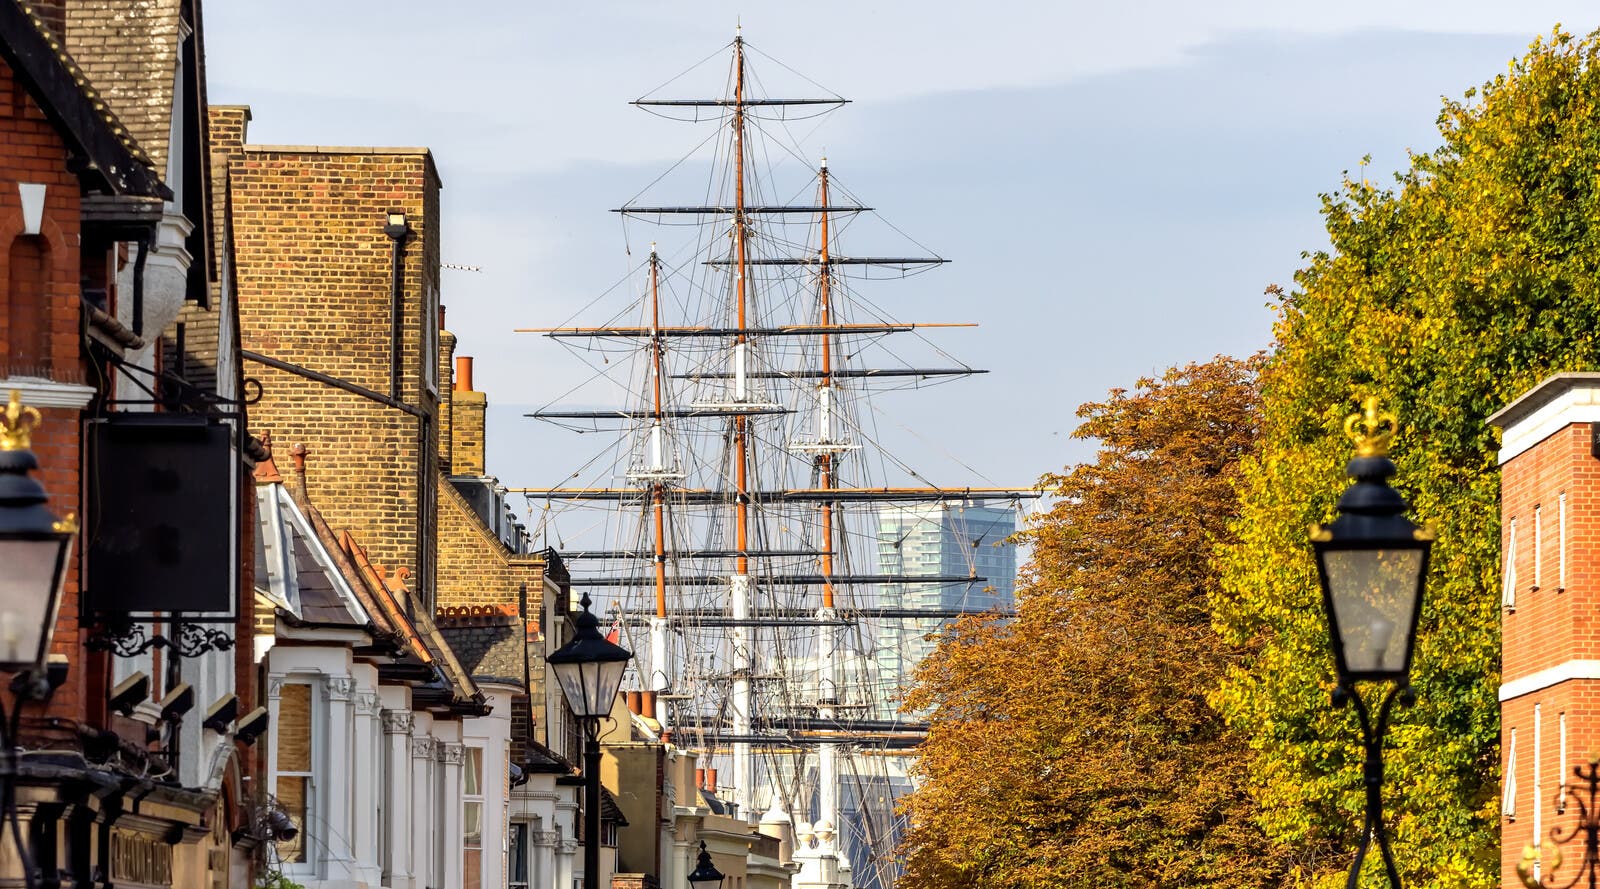 The Cutty Sark and Greenwich streets